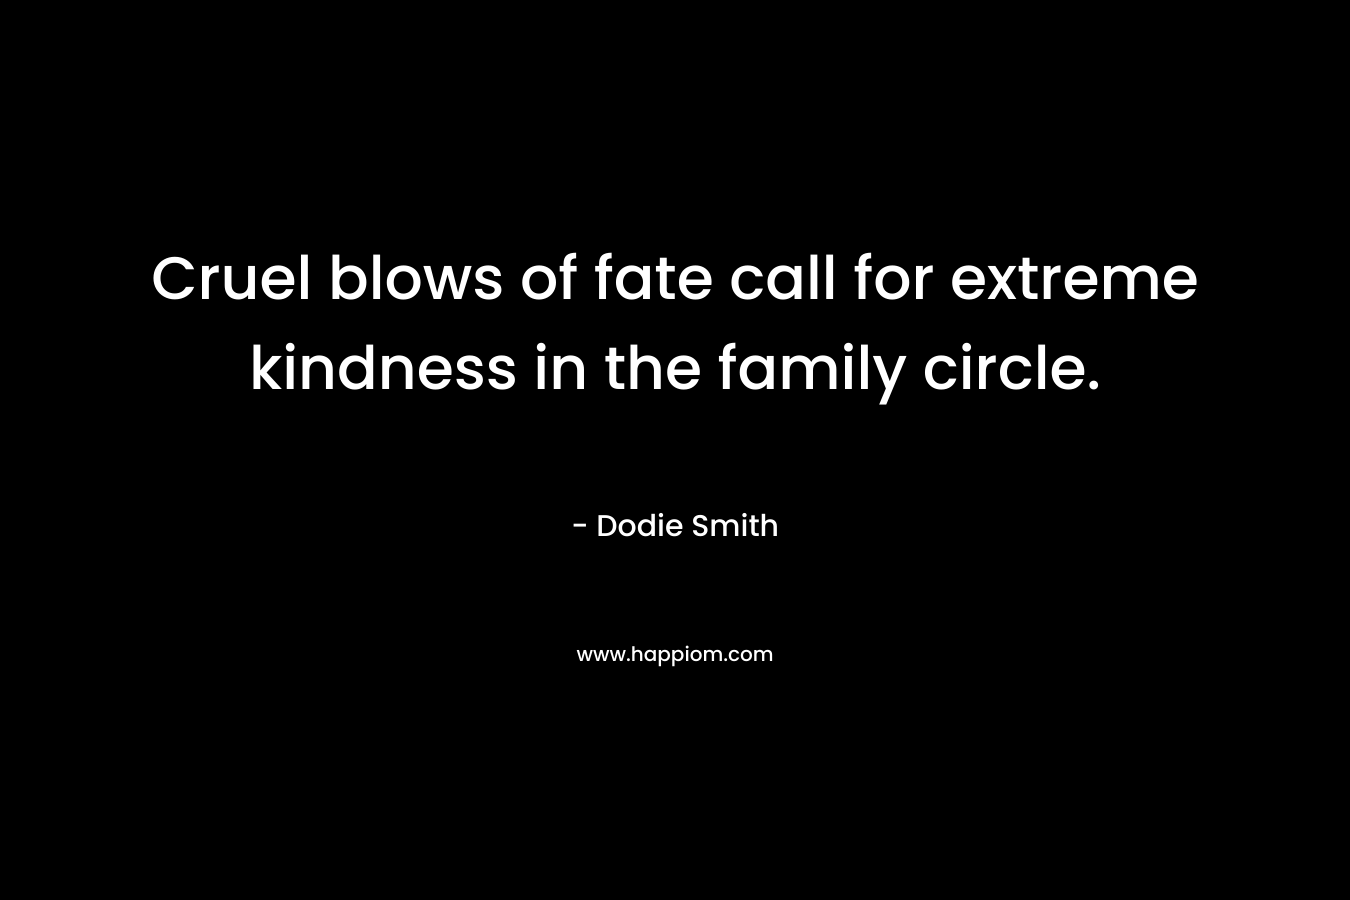 Cruel blows of fate call for extreme kindness in the family circle. – Dodie Smith